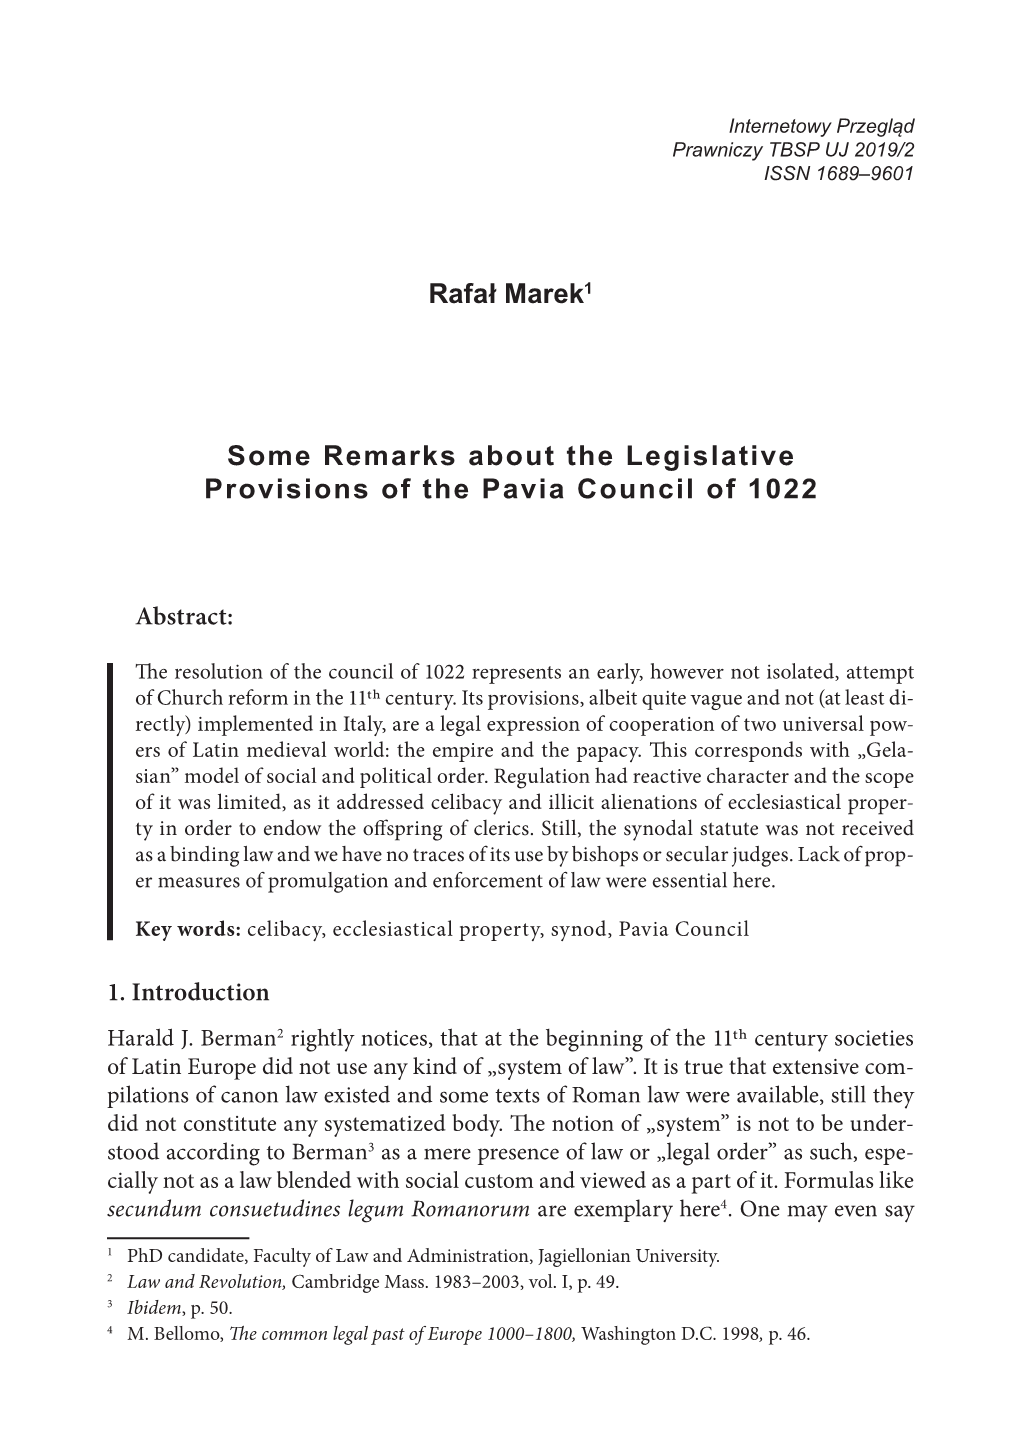 Some Remarks About the Legislative Provisions of the Pavia Council of 1022